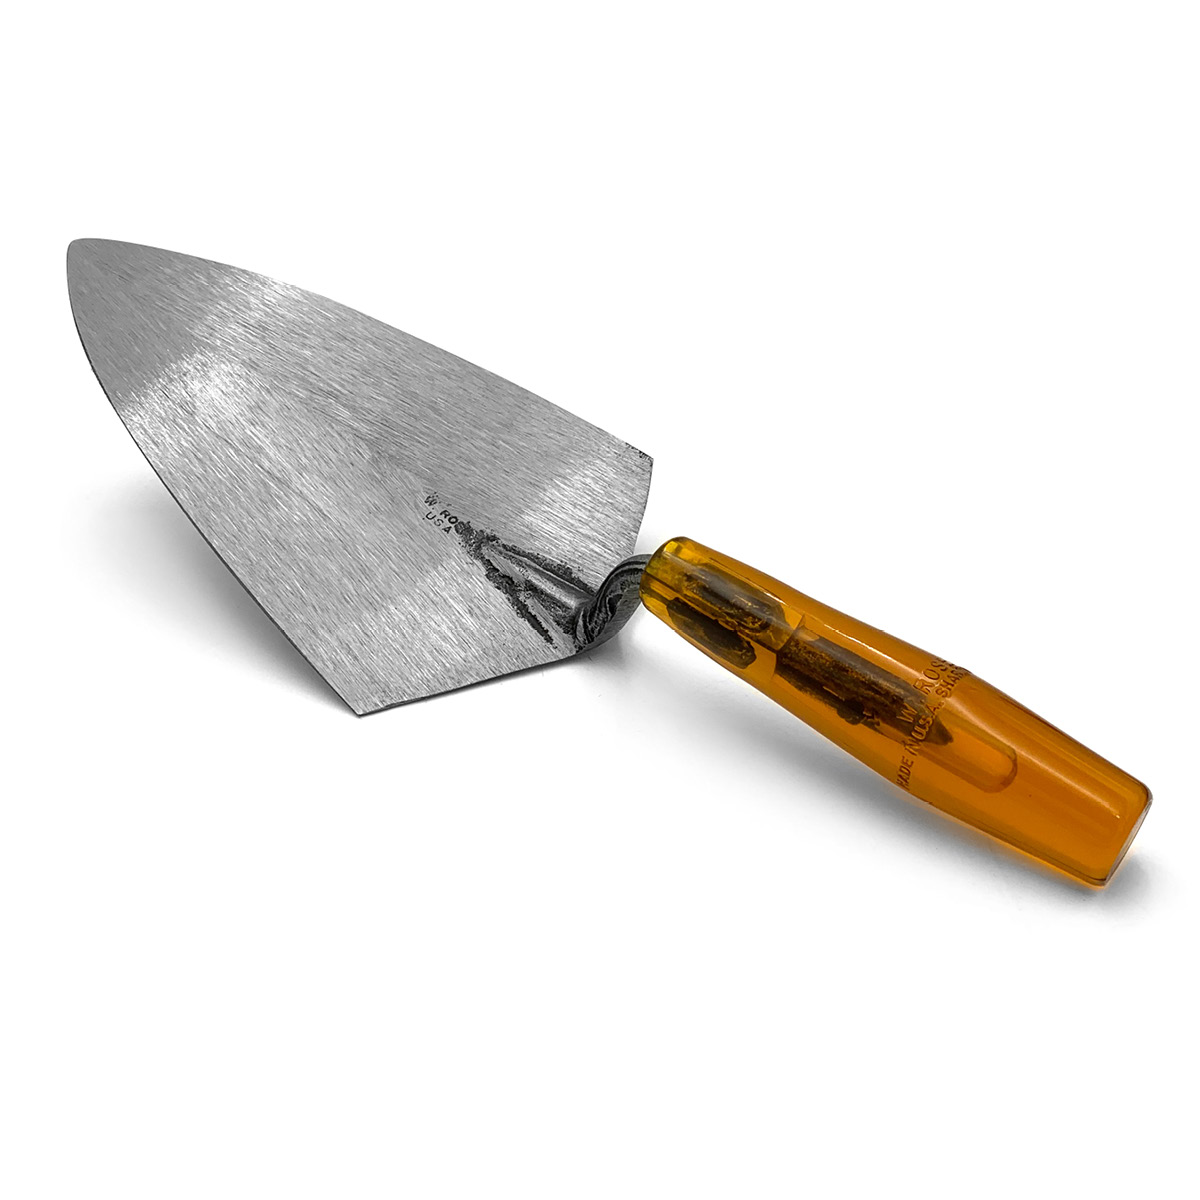 W.rose Trowels made from a single piece of specially forged steel for extra strength. These American made trowels can be purchased in the United Kingdom via Speedcrete who sell masonry professional tools. Philadelphia Plastic handle.